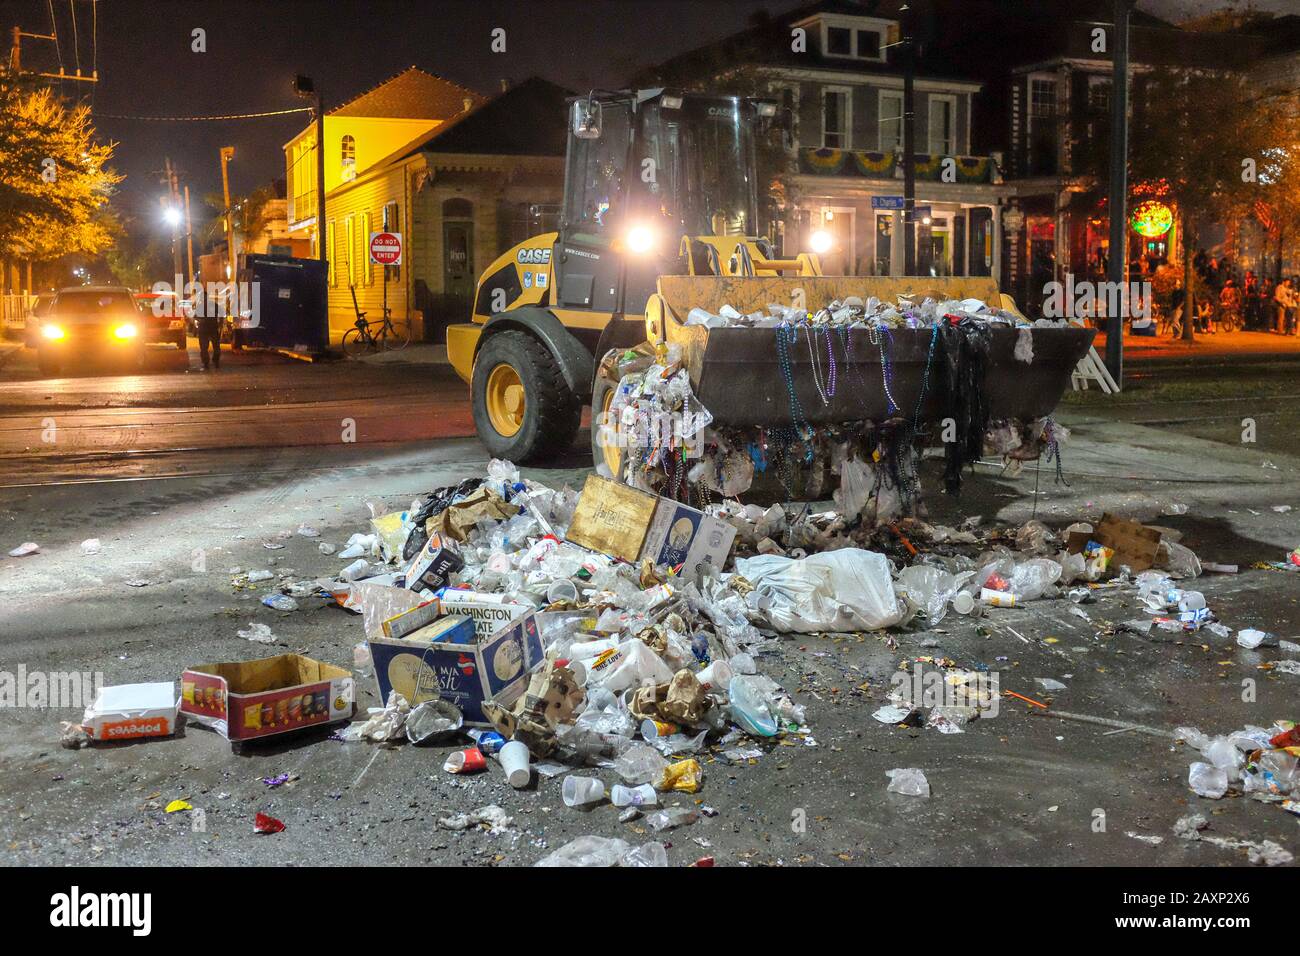 Cleanup after Mardi Gras Parade on St. Charles Avenue in New Orleans Stock Photo